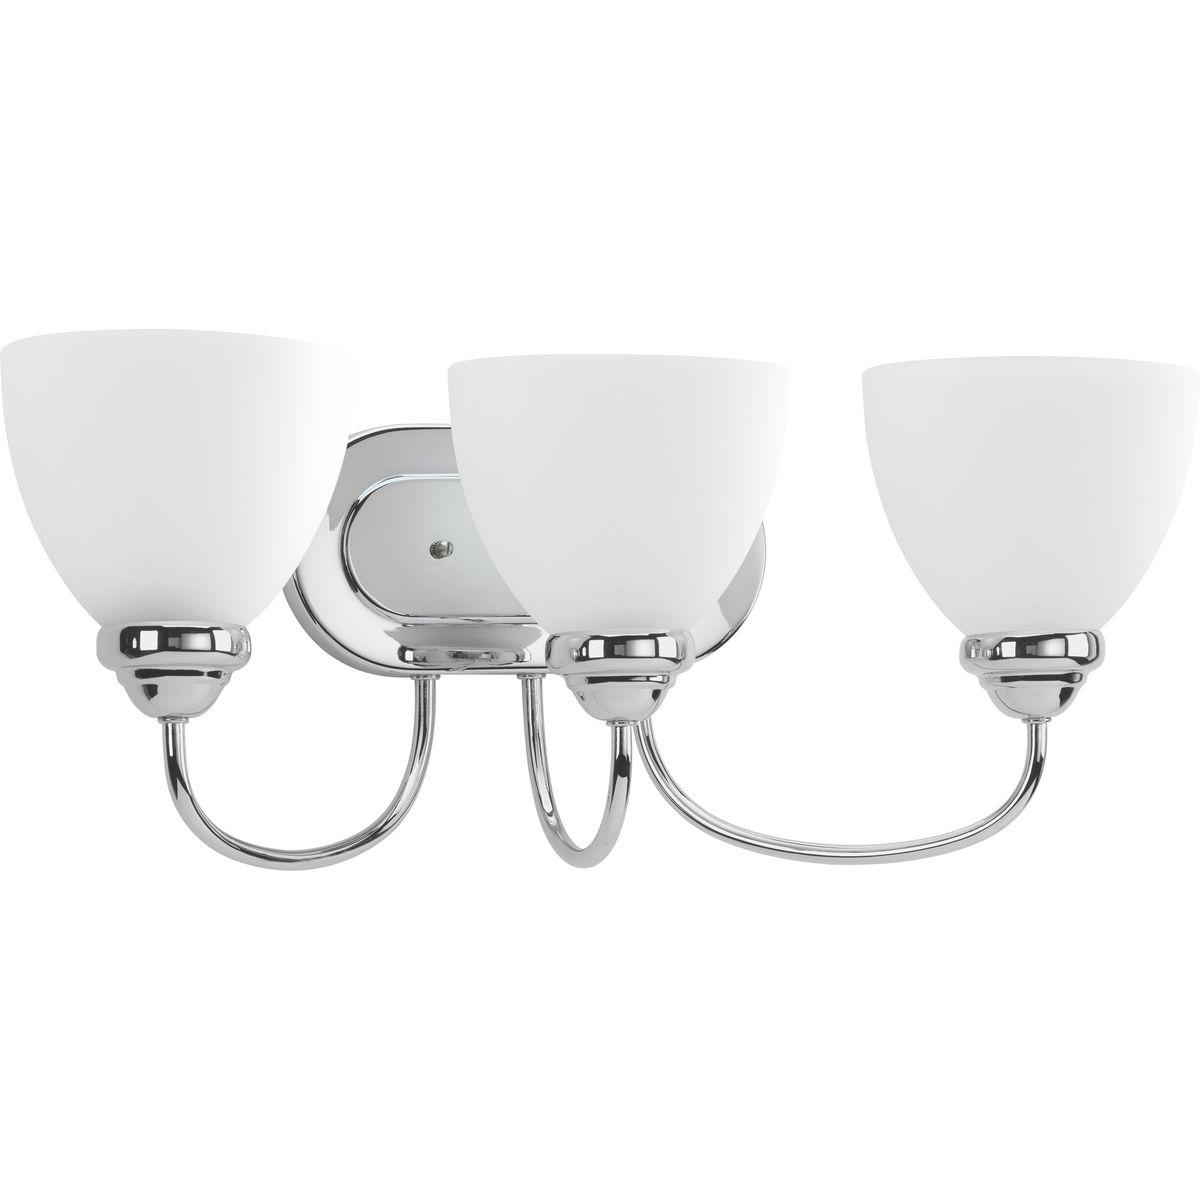 Hubbell P2919-15 The Heart Collection possesses a smart simplicity to complement today's home. This three-light bath bracket includes etched glass shades to add distinction and provide pleasing illumination to any room. Versatile design permits installation of fixture fac